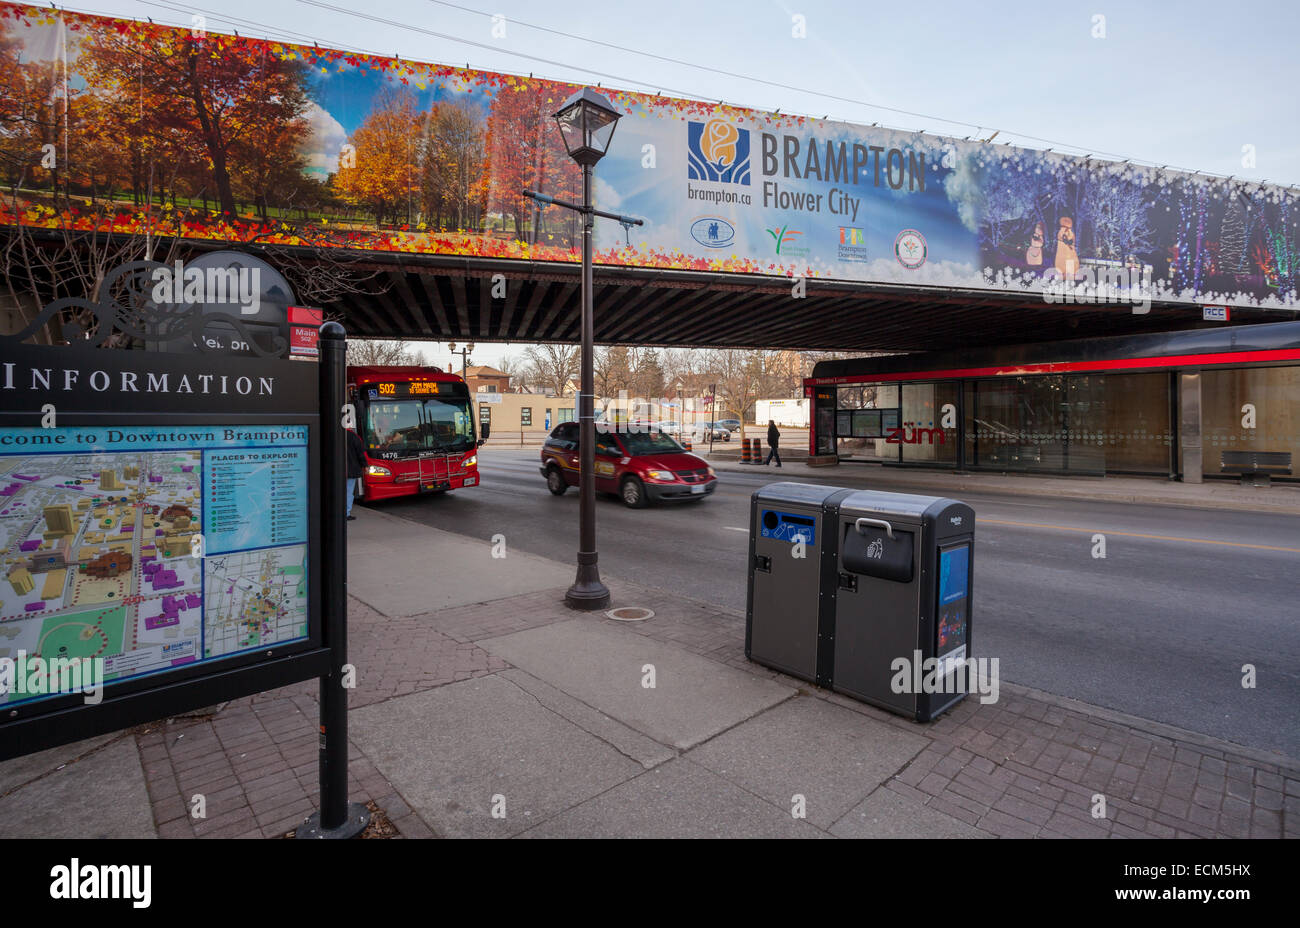 A banner advertising Brampton and a Züm rapid transit bus and station. Ontario, Canada. Stock Photo